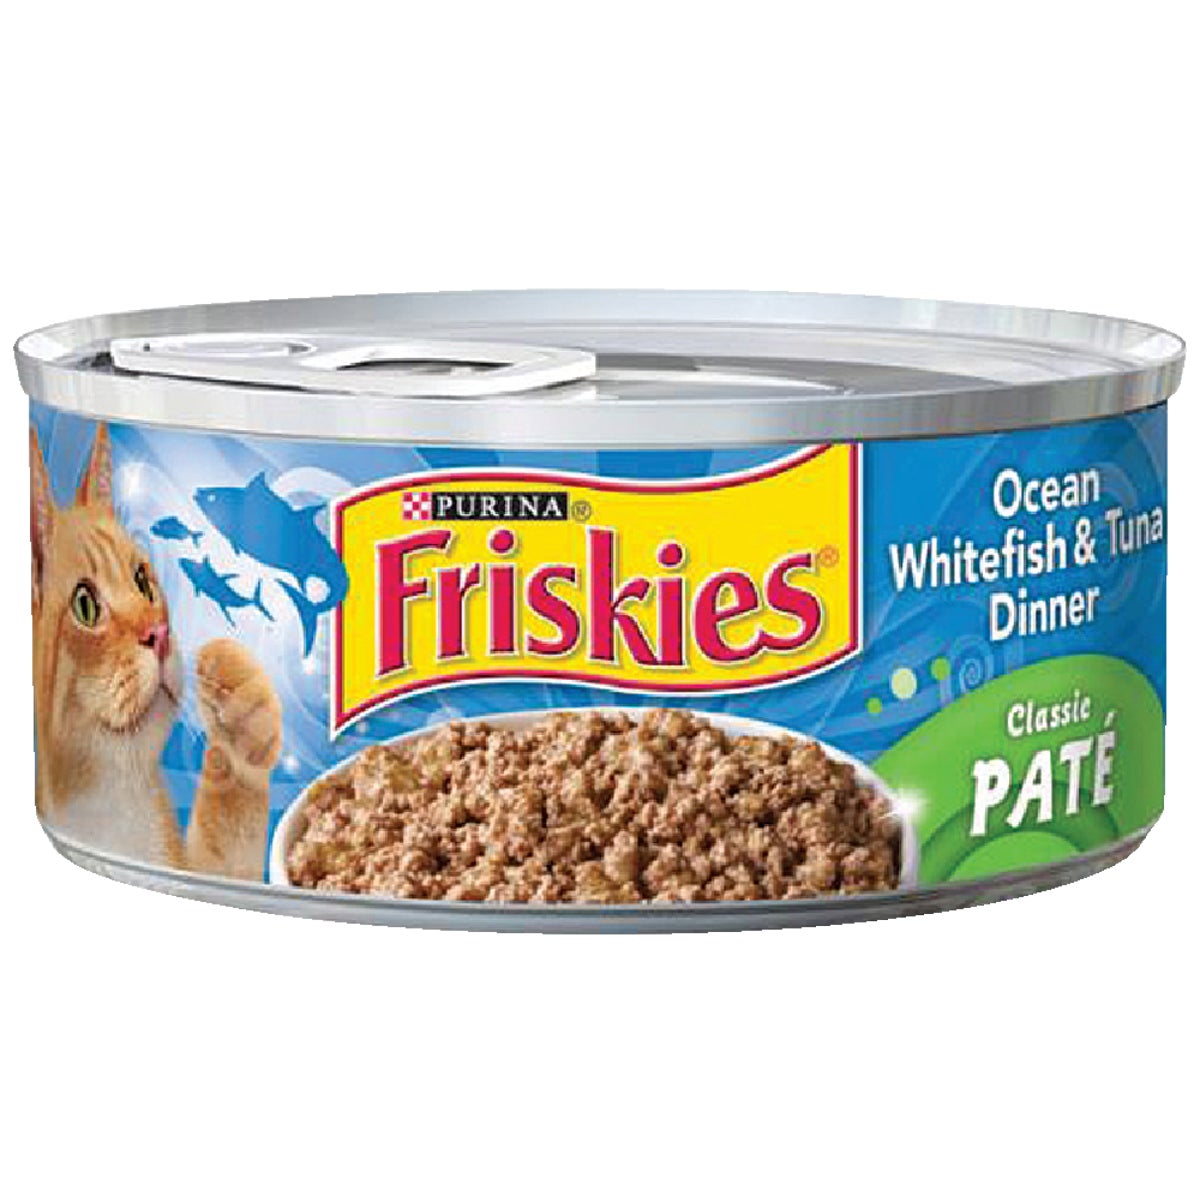 Purina Friskies 5.5 Oz. Ocean Whitefish & Tuna Dinner Flavor All Ages Wet Cat Food